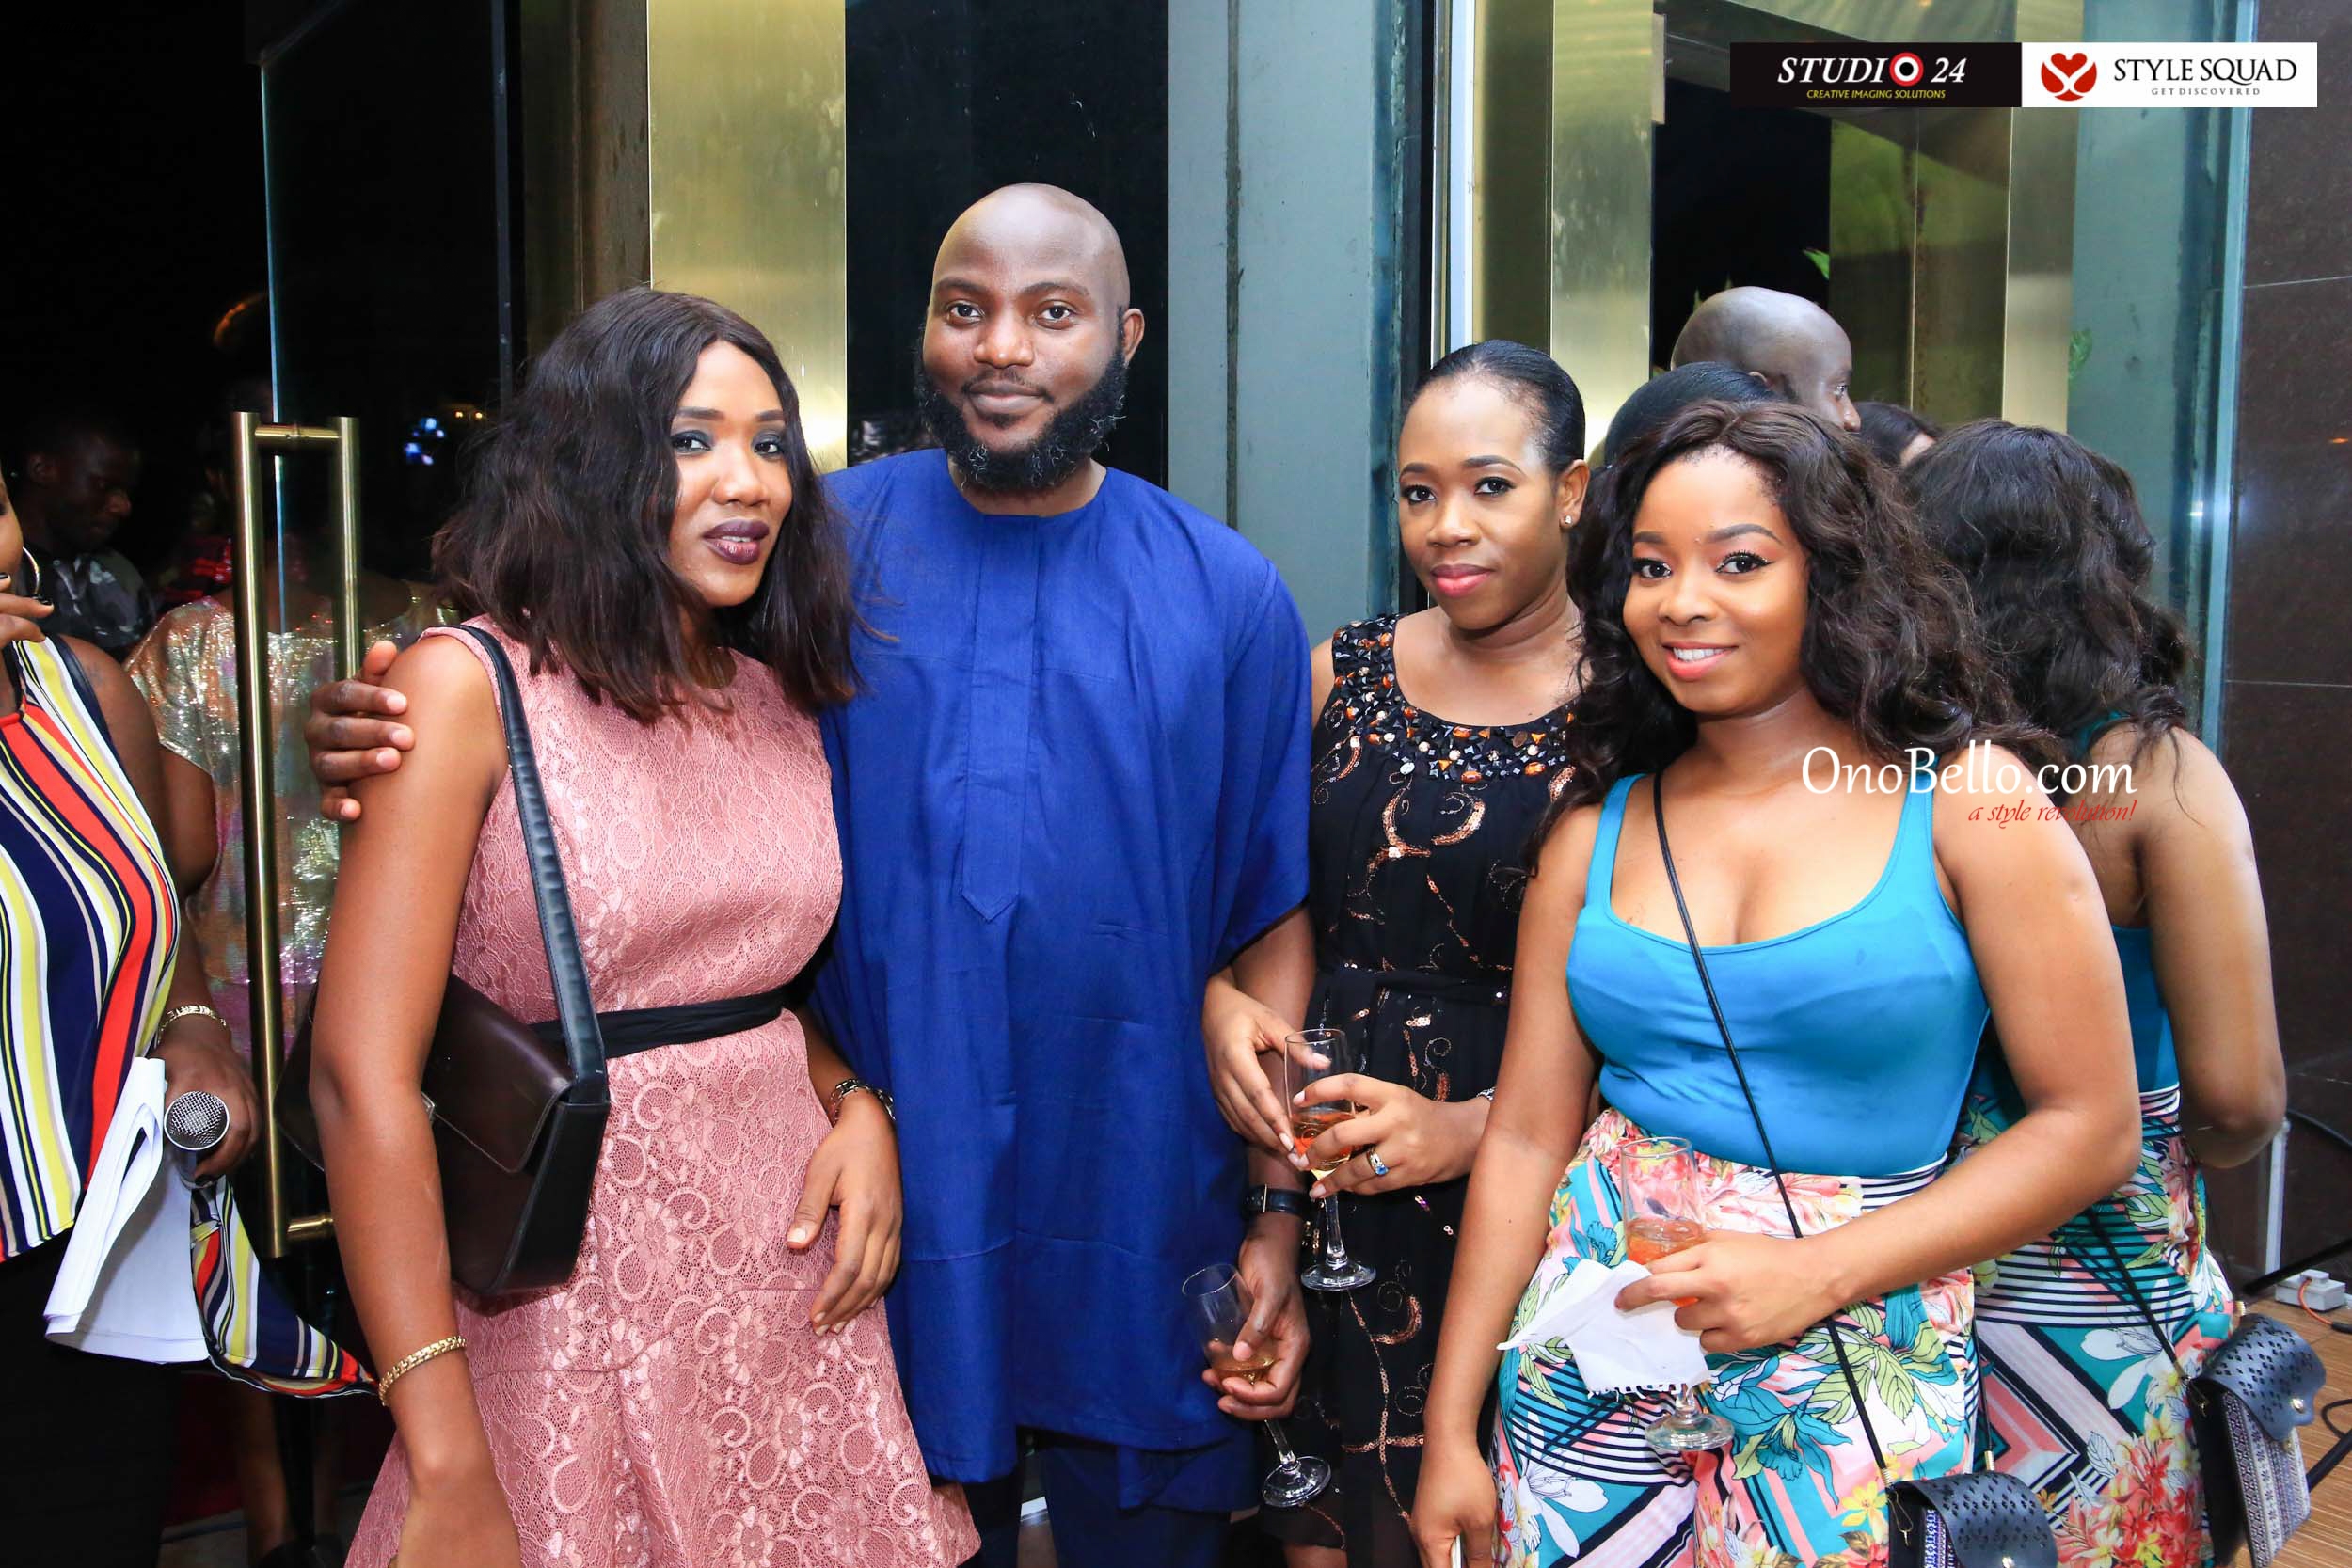 Ini-Dinma Okojie, Peace Hyde, More Attend Eloy Awards 2017 Nominees Party